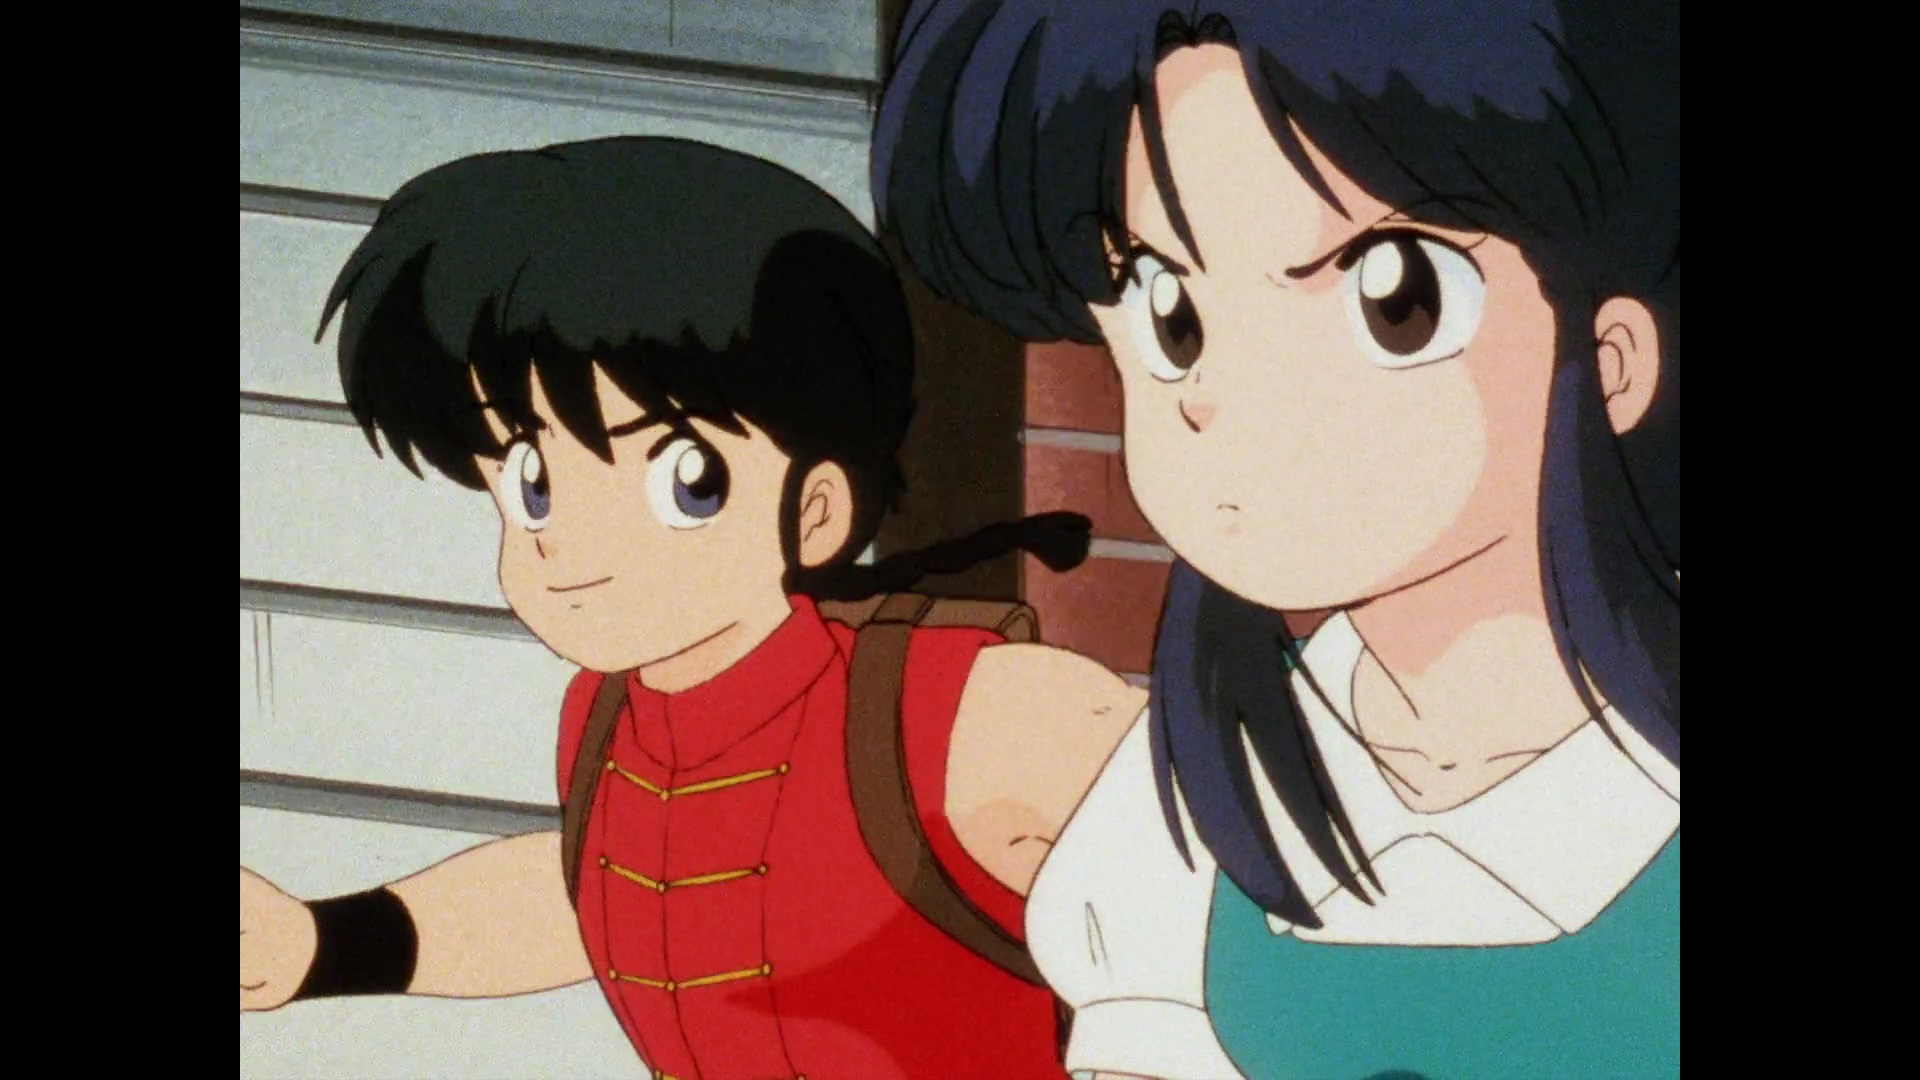 Ranma Saotome and Akane Tendo share a moment while they jog to school in a scene from the Ranma 1/2 TV anime.